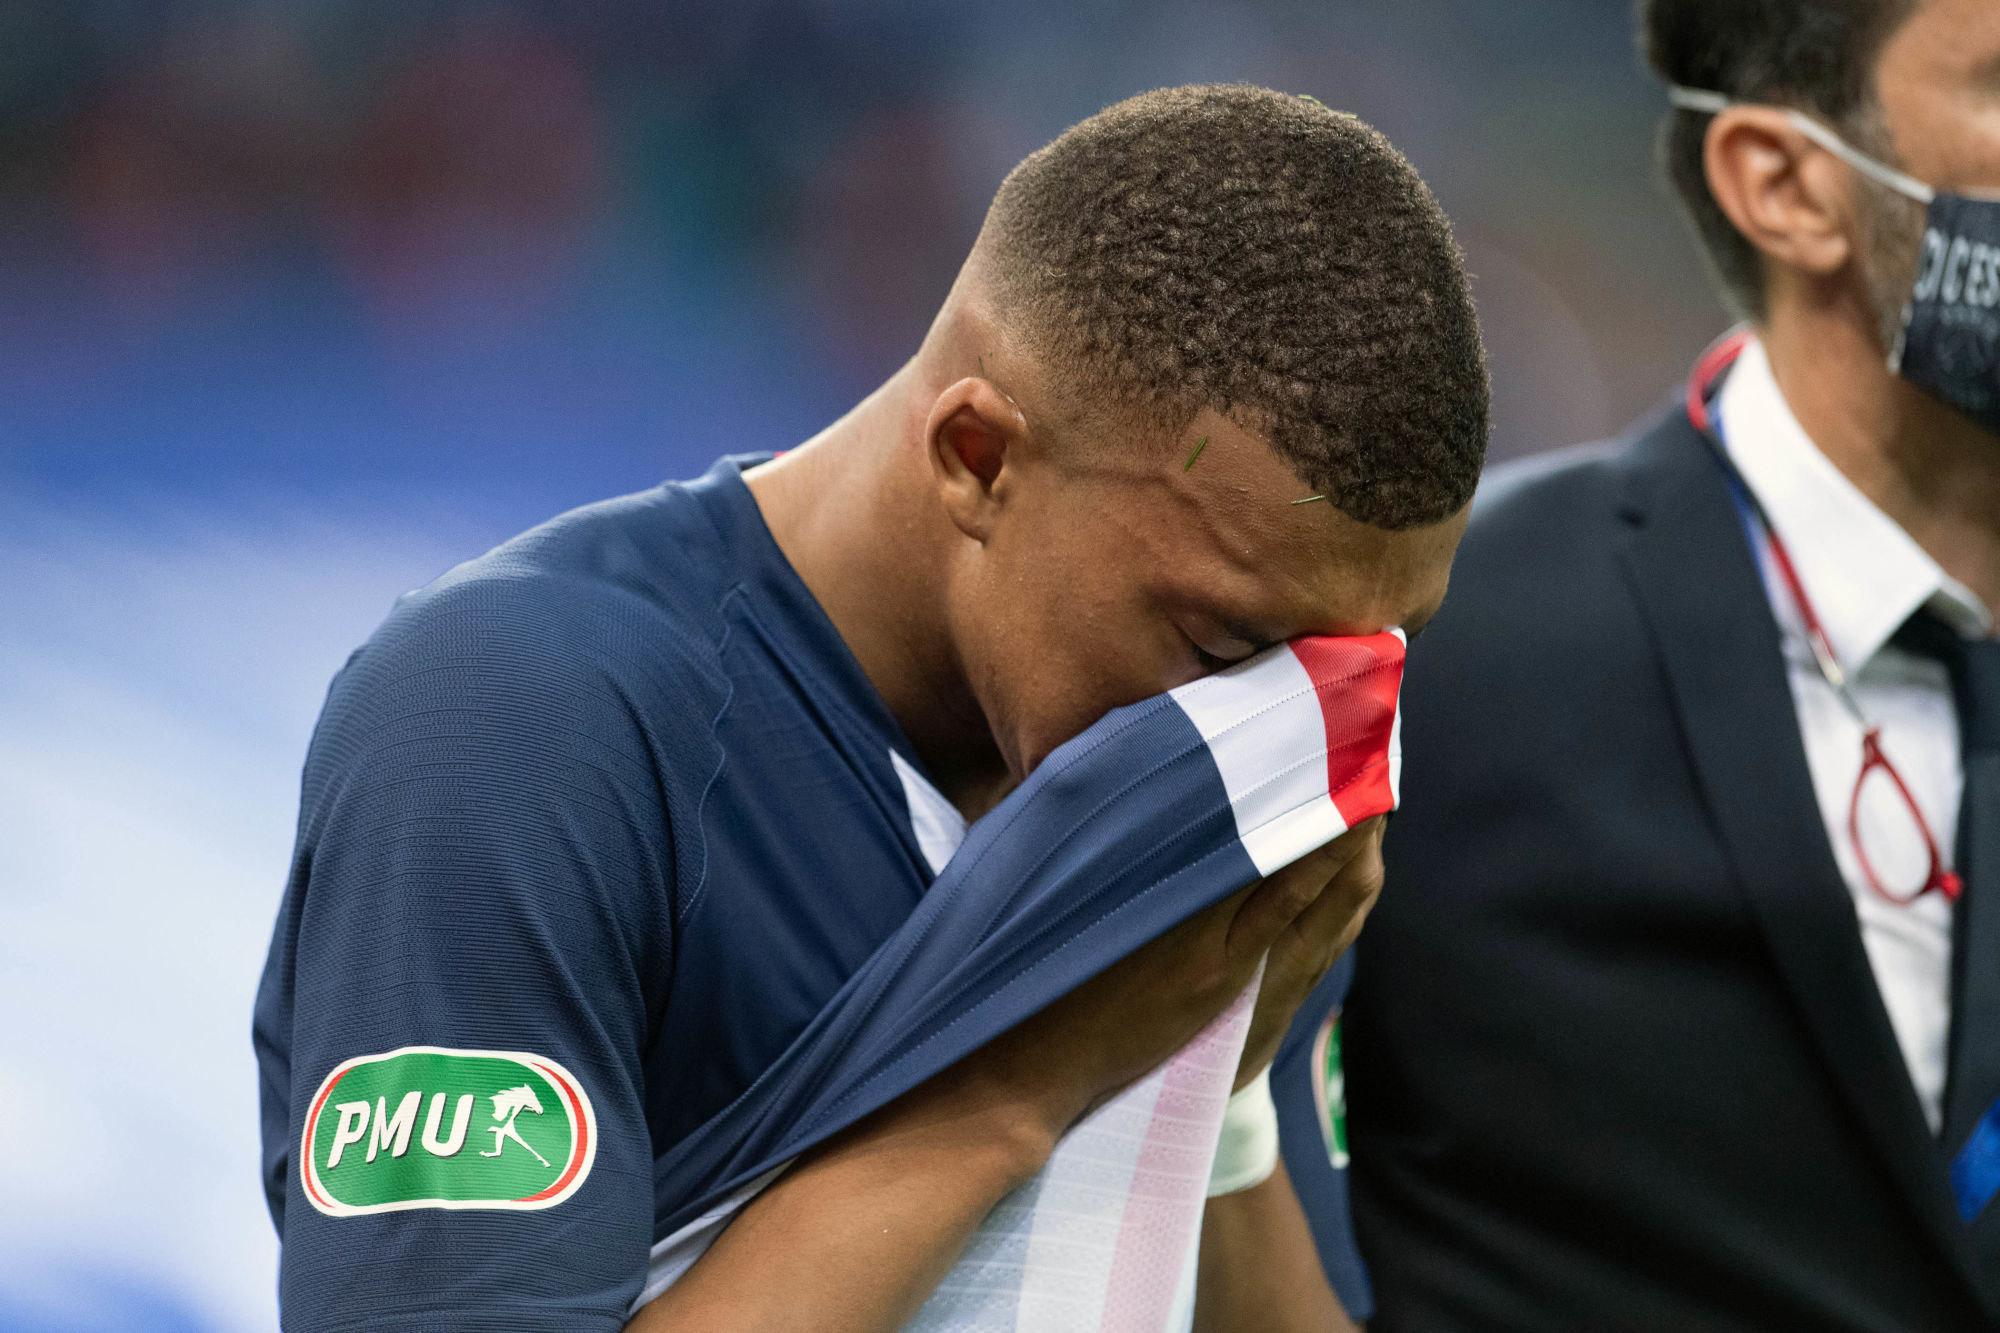 (200725) -- PARIS, July 25, 2020 (Xinhua) -- Paris Saint Germain's Kylian Mbappe reacts as he leaves the field after injury during the French Cup final match between AS Saint-Etienne and Paris Saint Germain at Stade de France in Saint-Denis, outside Paris, France, July 24, 2020. (Xinhua) (Photo by Xinhua/Sipa USA) 
Photo by Icon Sport - Stade de France - Paris (France)